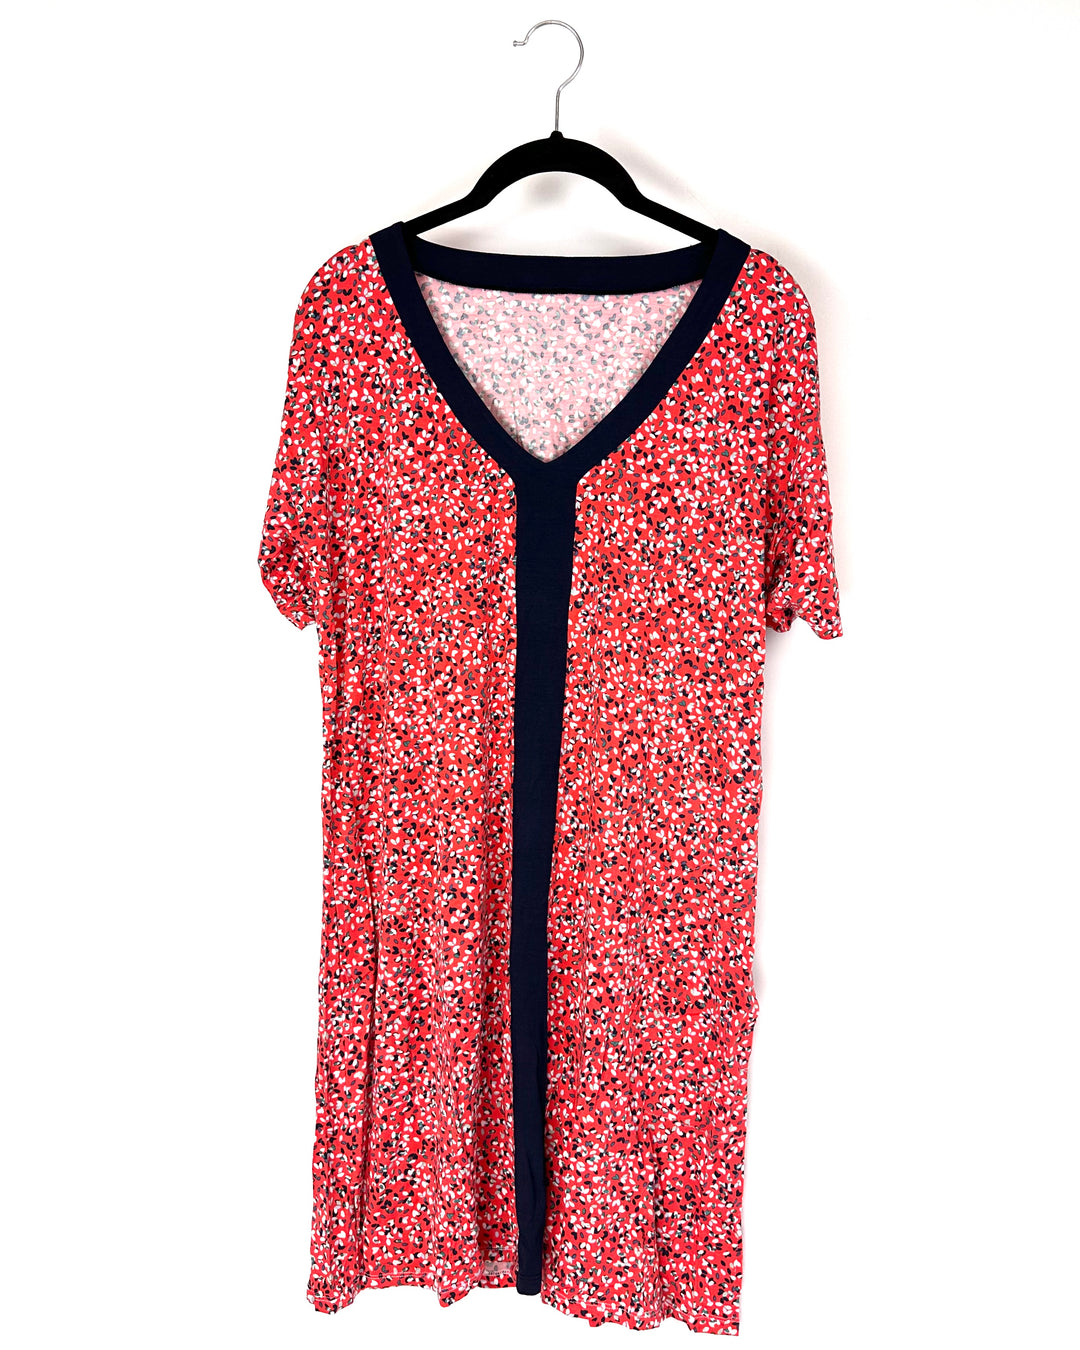 Coral Printed Night Gown - Small